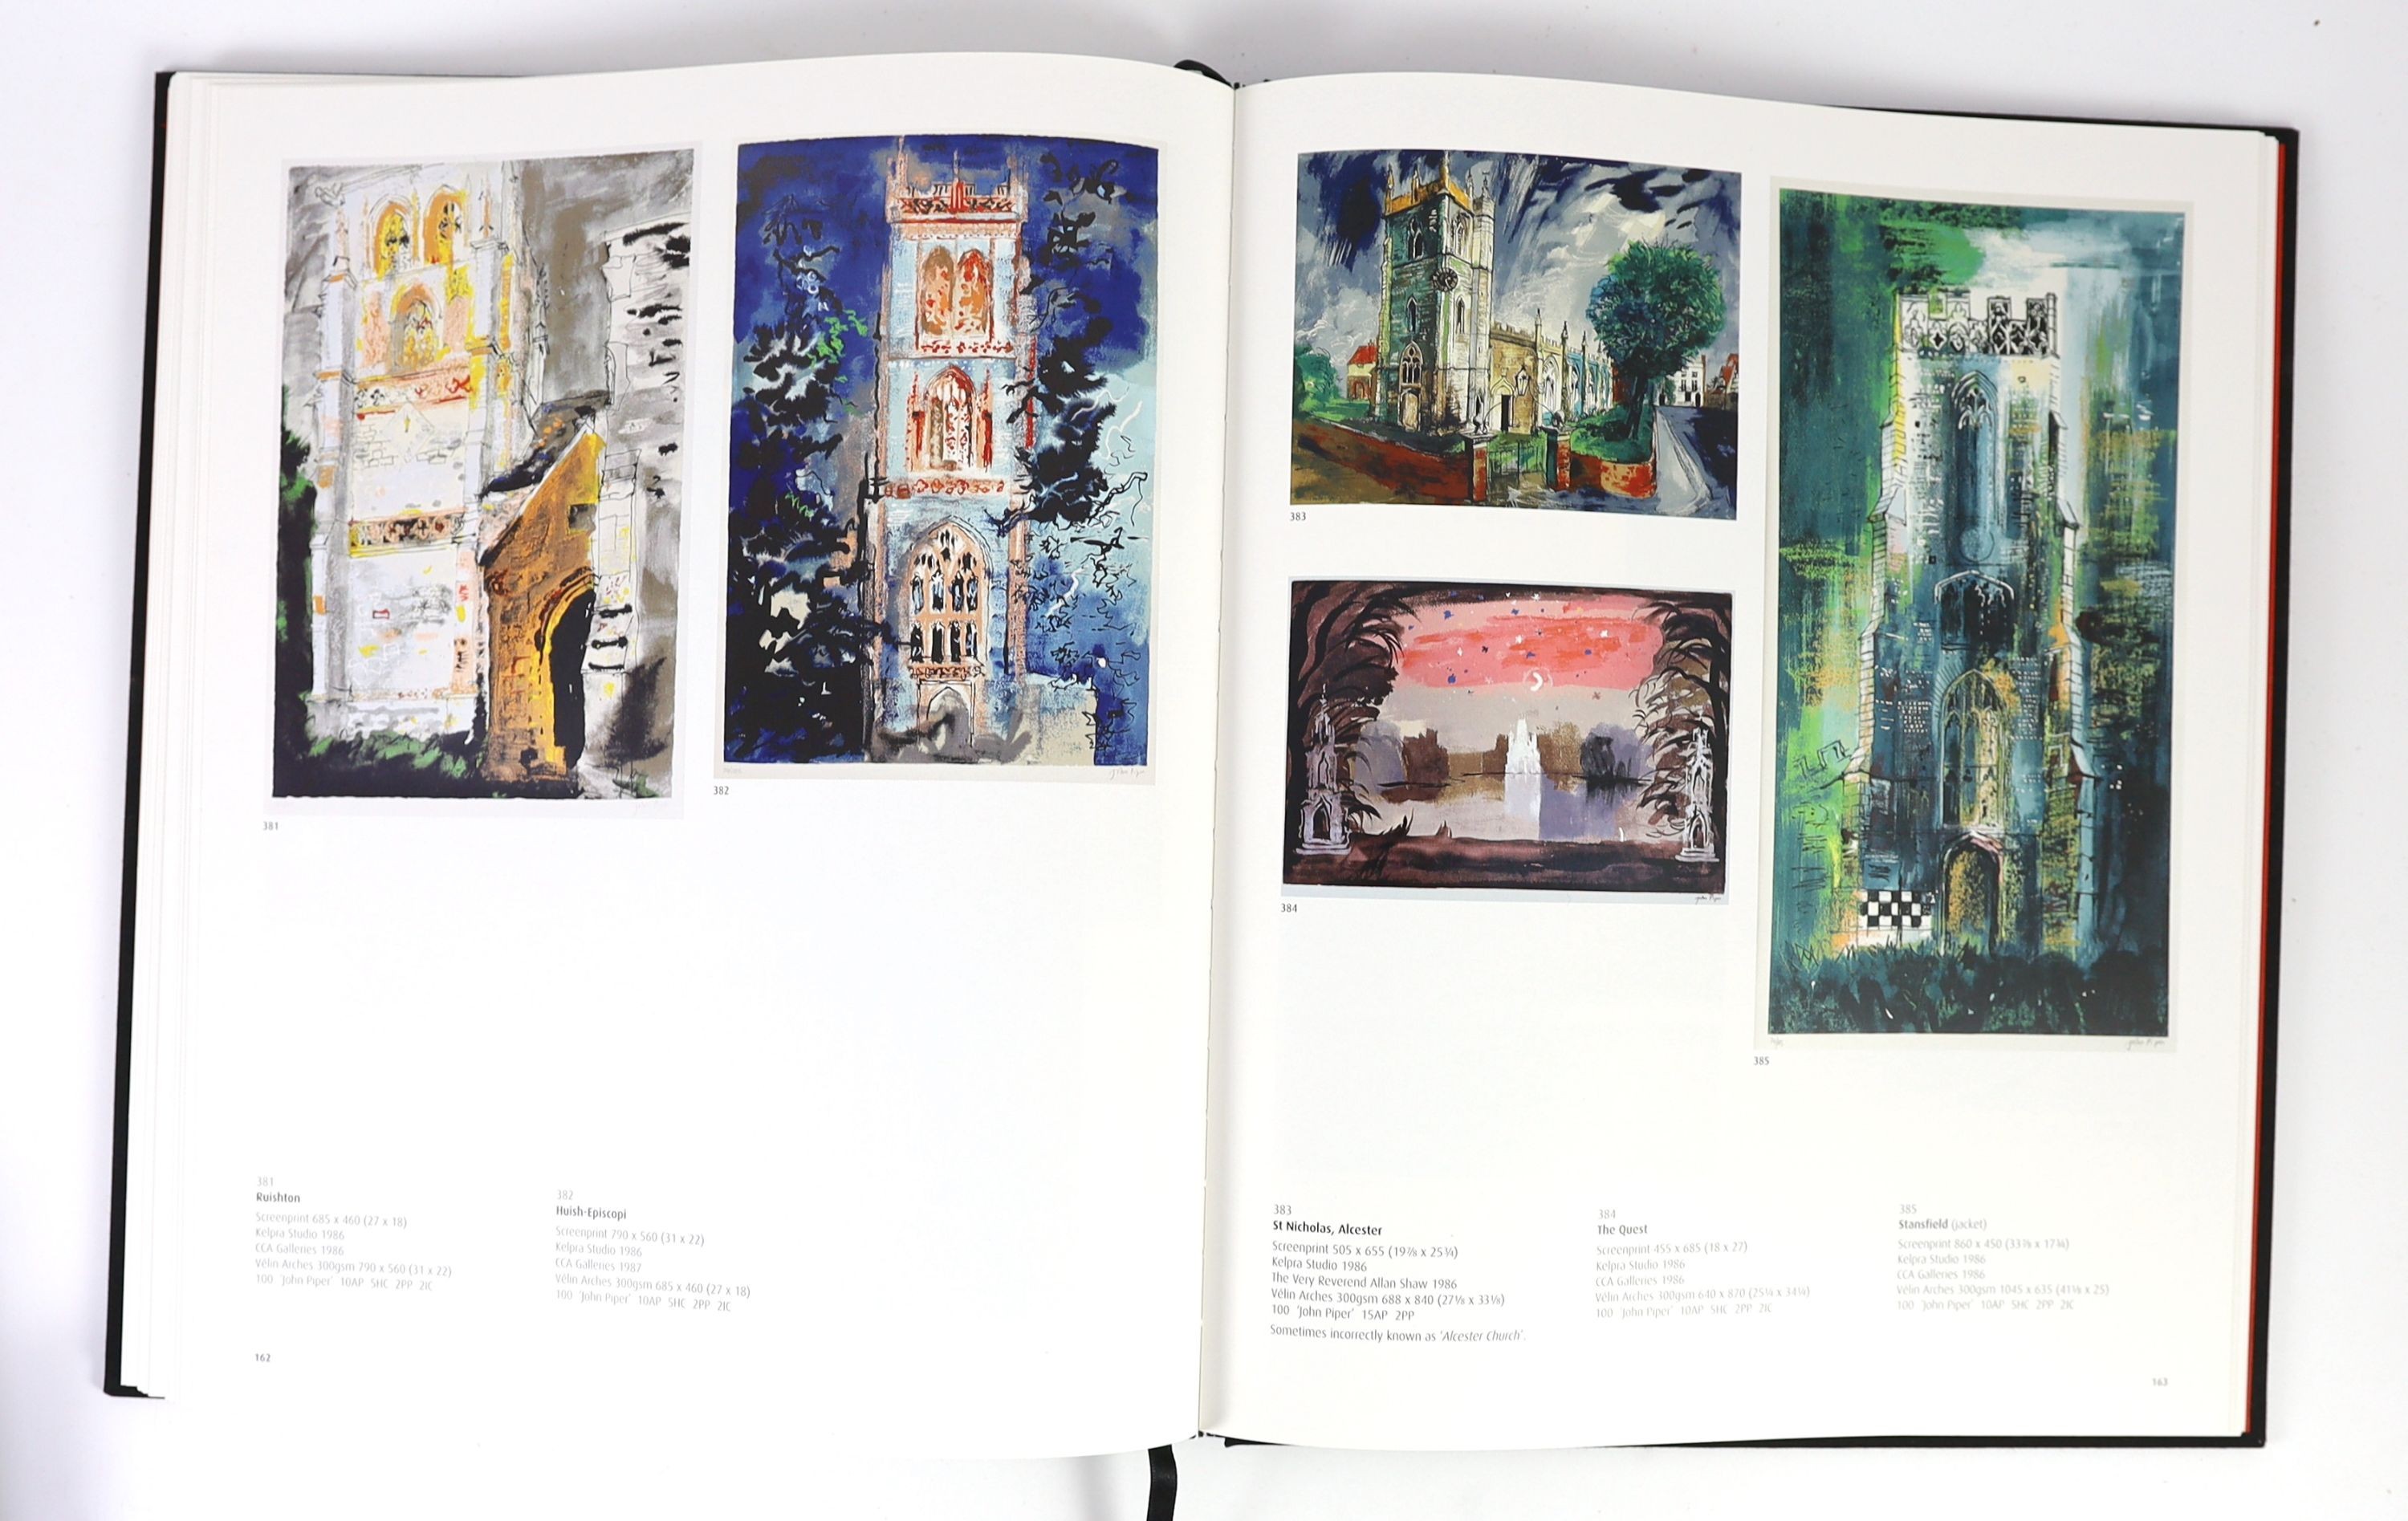 Levinson, Orde - The Prints of John Piper: Quality and Experiment. A Catalogue Raisonne 1923-91. Revised and Expanded Edition, one of 100, 4to, black cloth, together with 2 signed photographs of the author and 3 limited